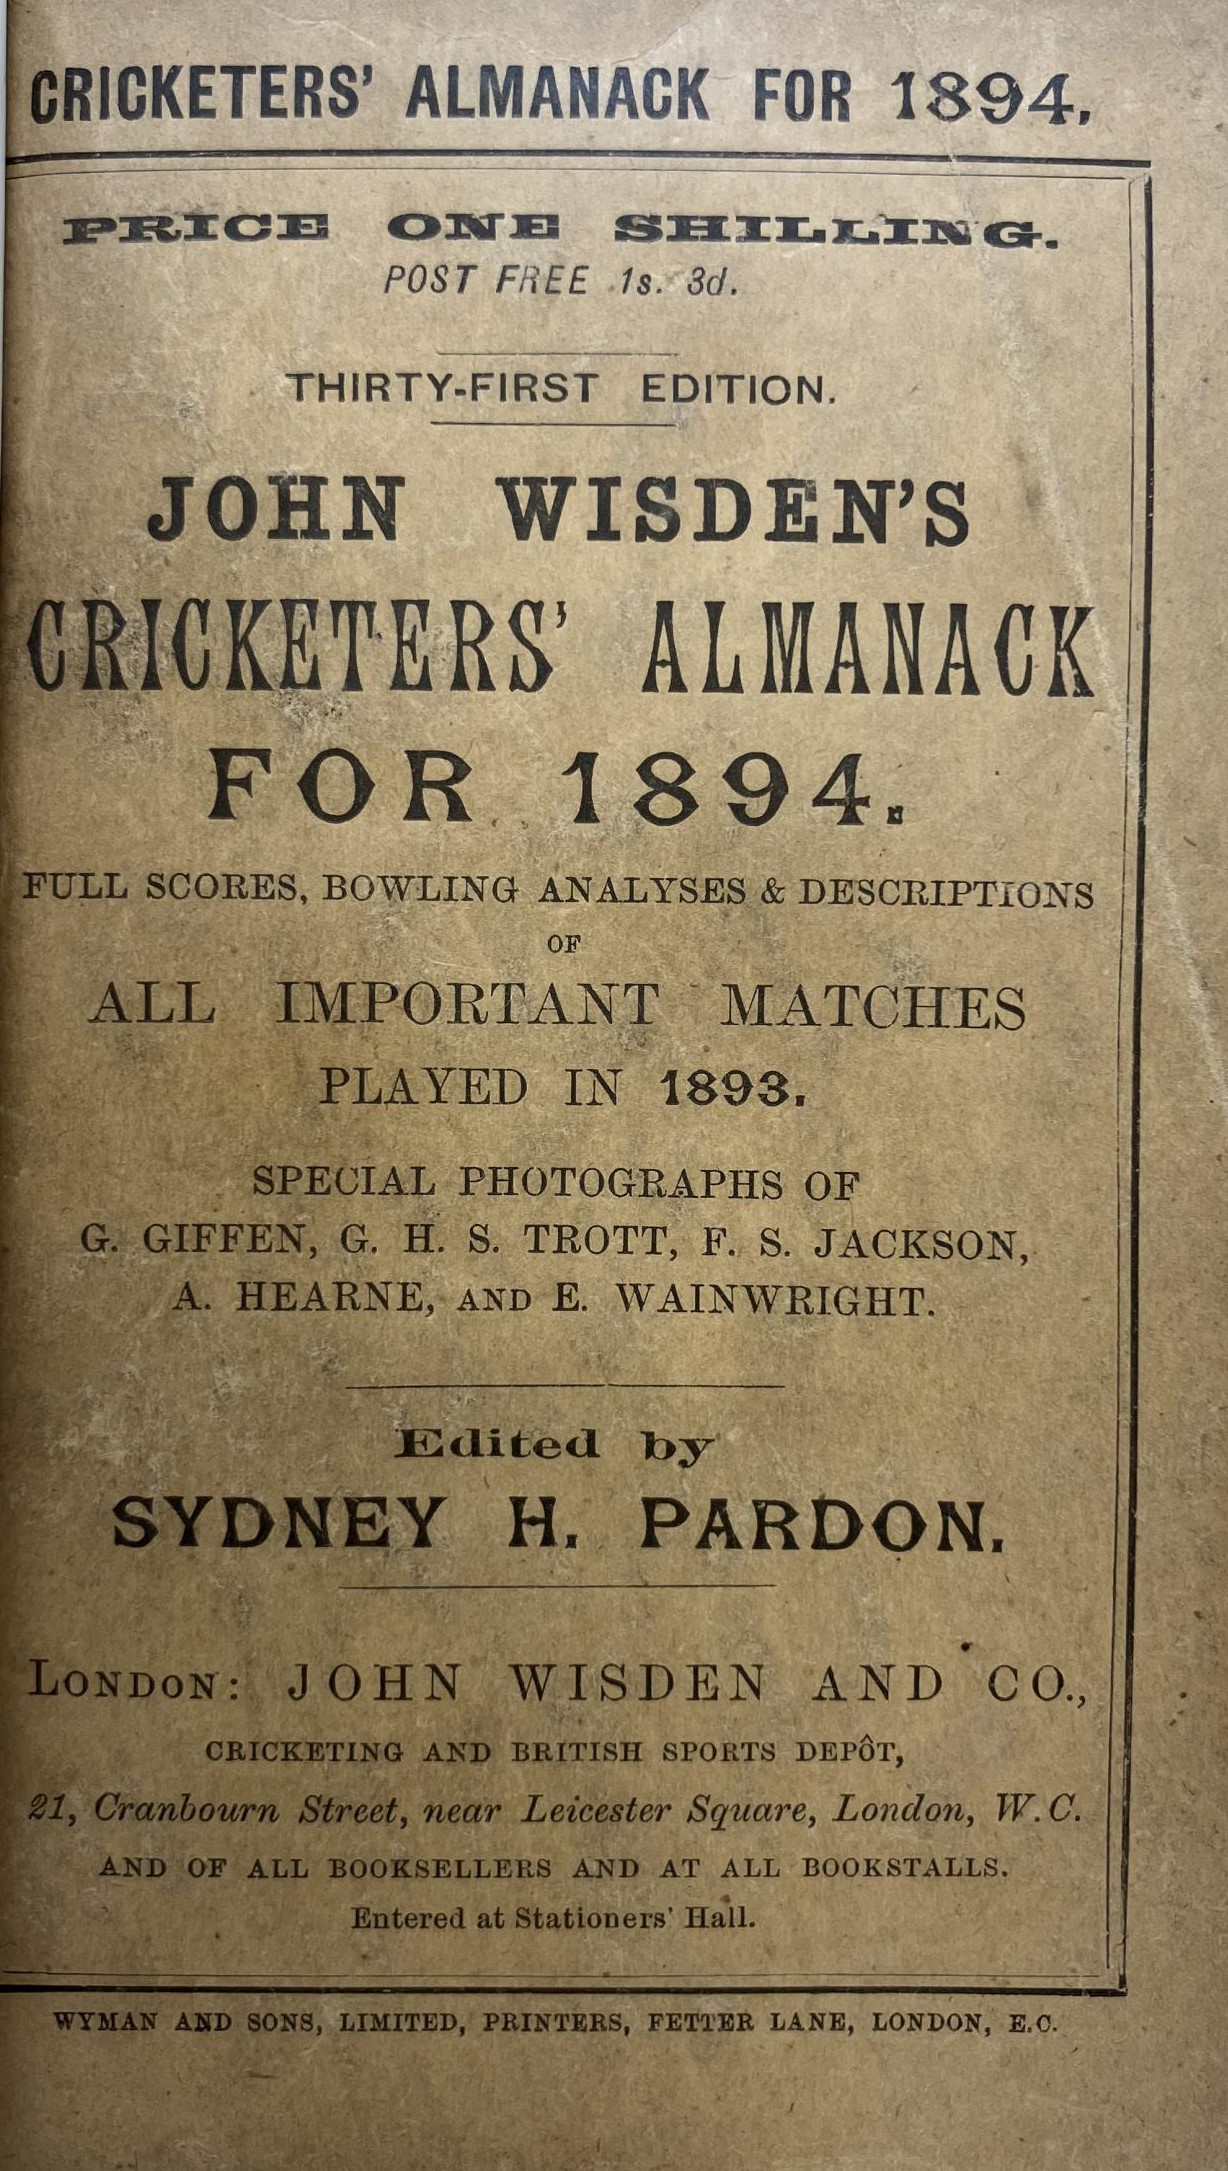 A Wisden Cricketers' Almanack, 1894 Provenance:  From the Harry Brewer Cricket Memorabilia - Image 3 of 4